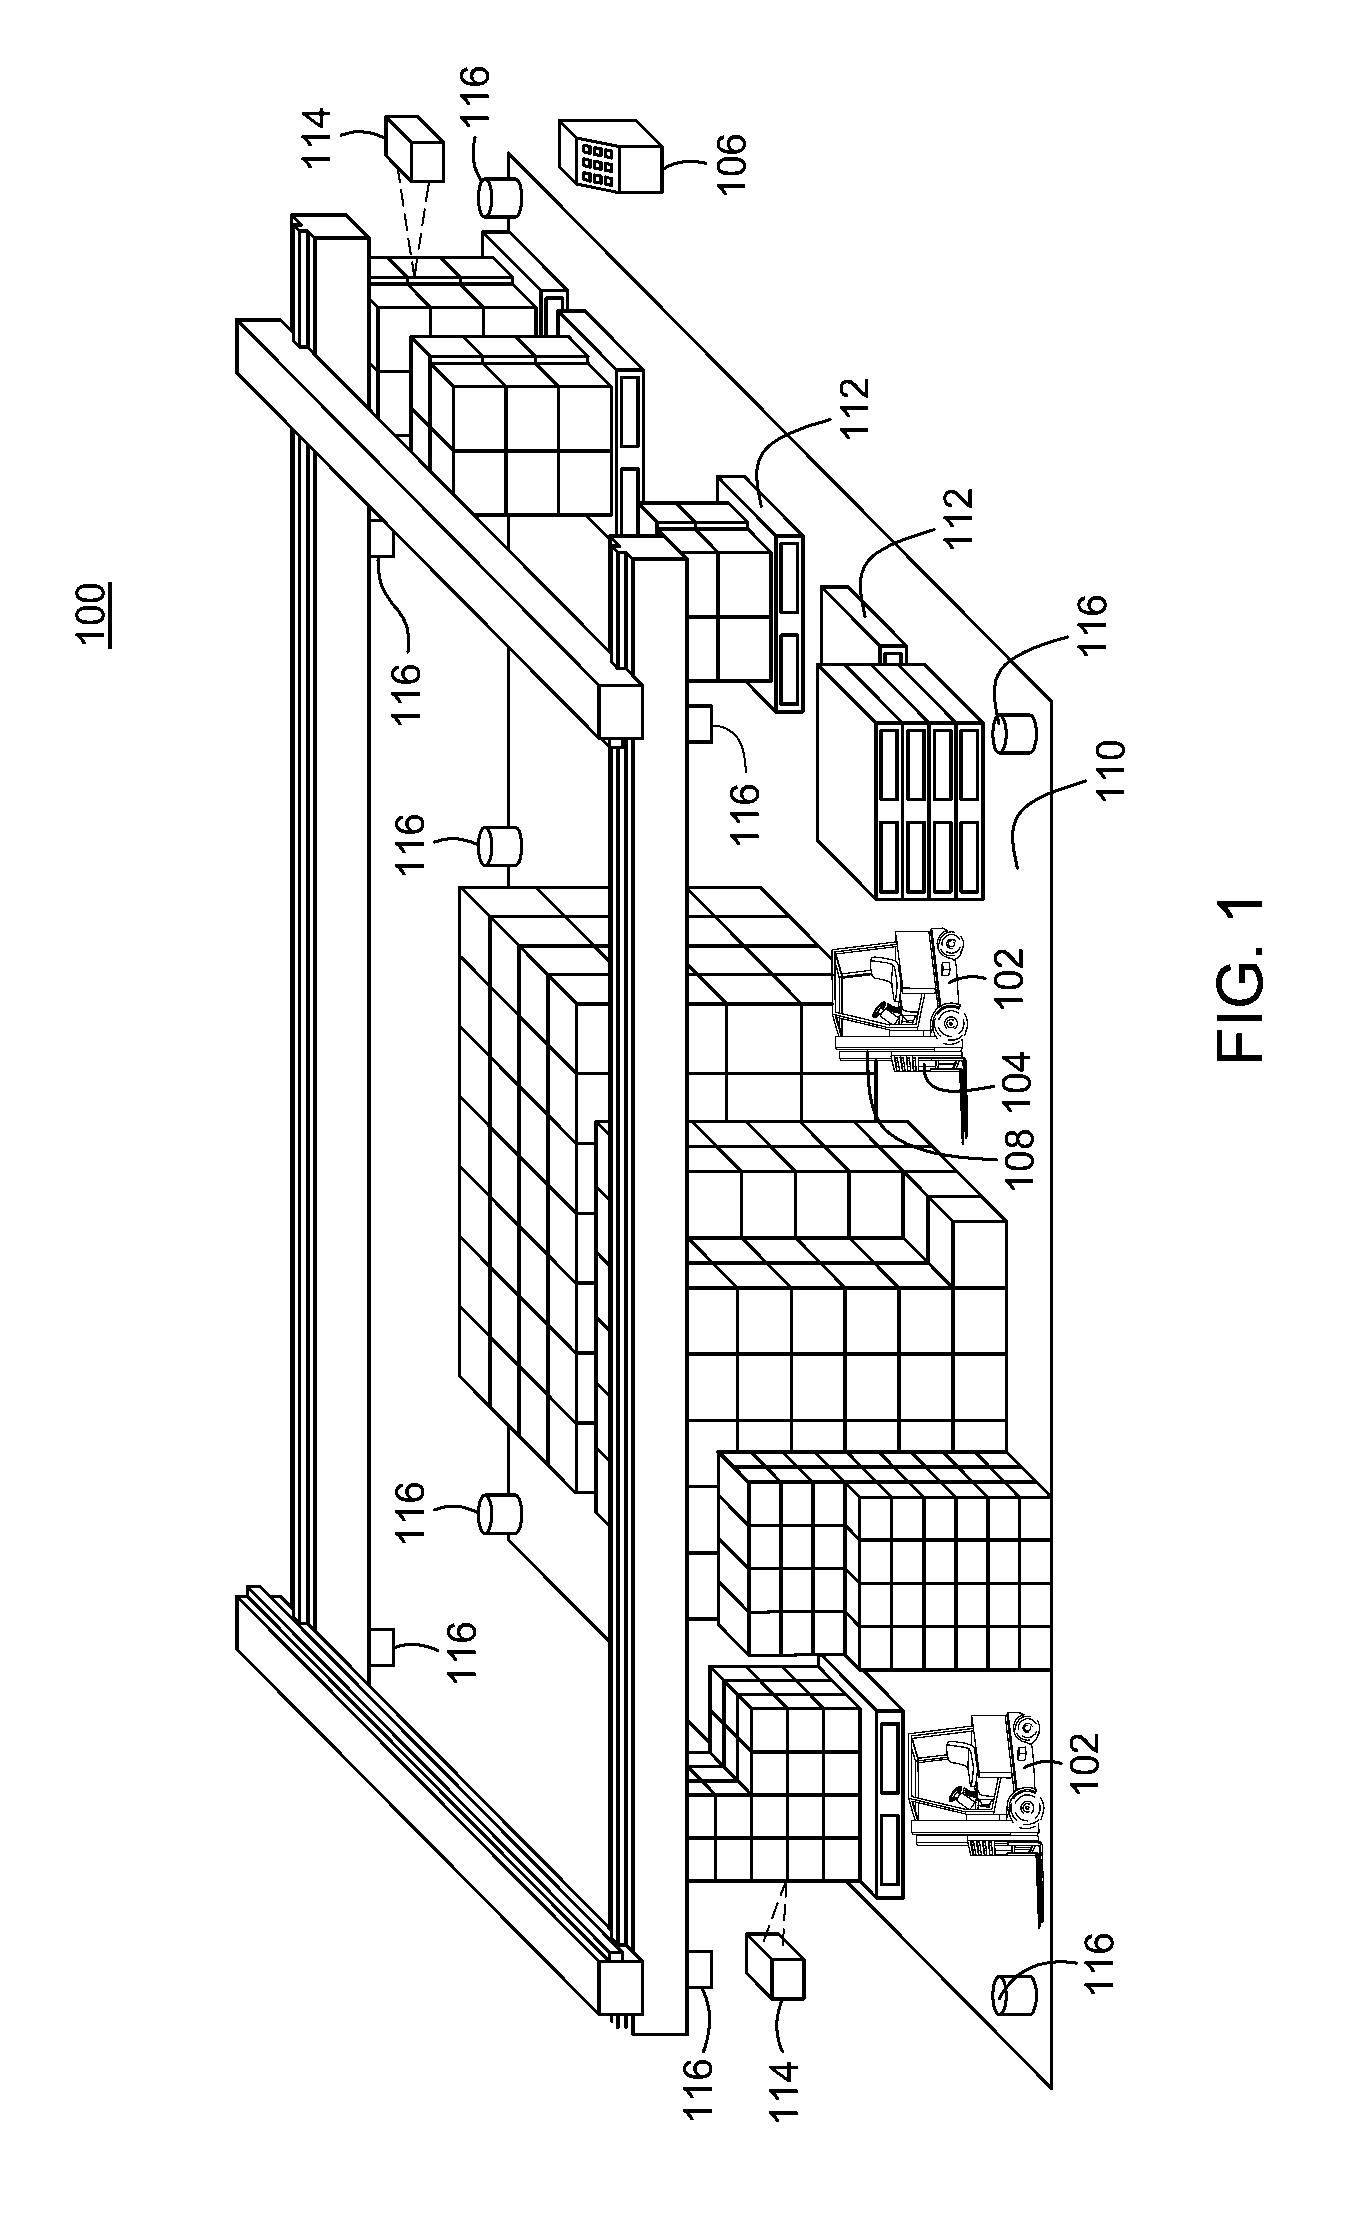 Method and apparatus for providing accurate localization for an industrial vehicle